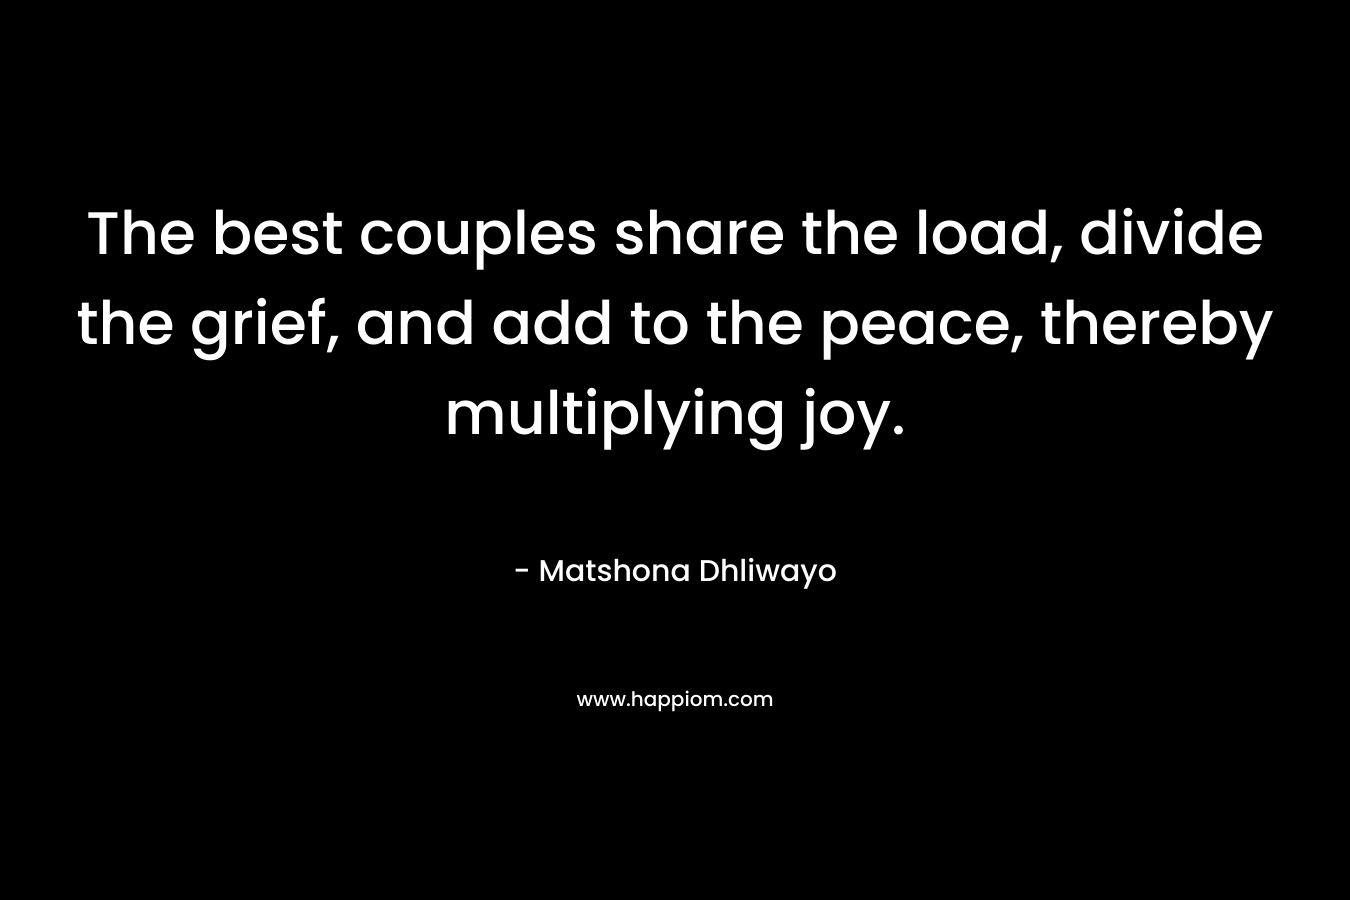 The best couples share the load, divide the grief, and add to the peace, thereby multiplying joy. – Matshona Dhliwayo